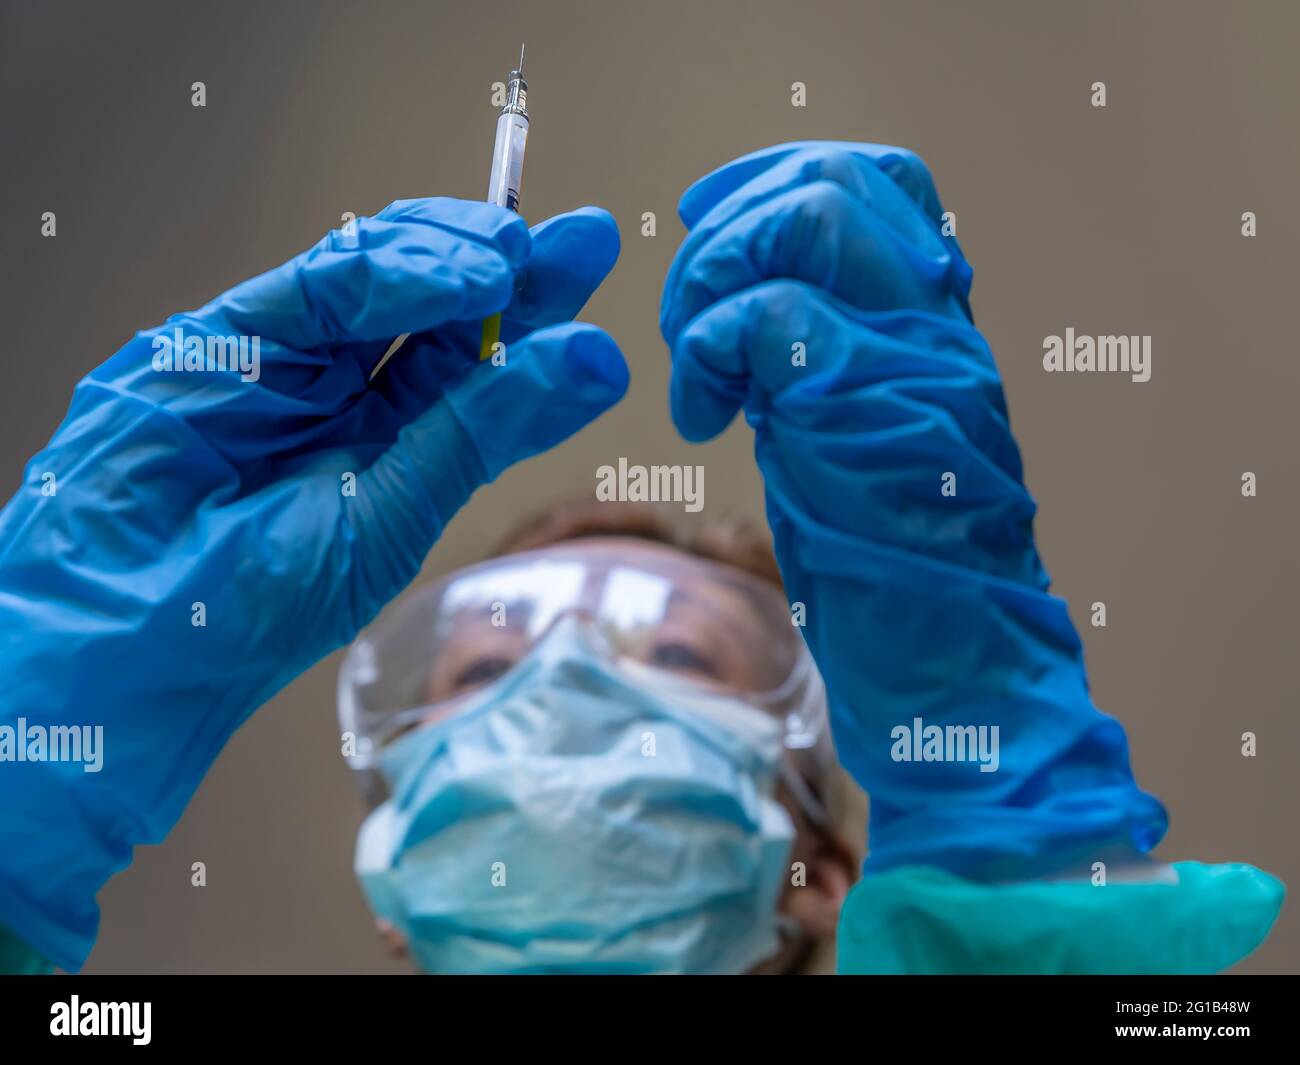 A nurse prepares the vaccine against the Coronavirus Covid-19 to inoculate it to a patient Stock Photo